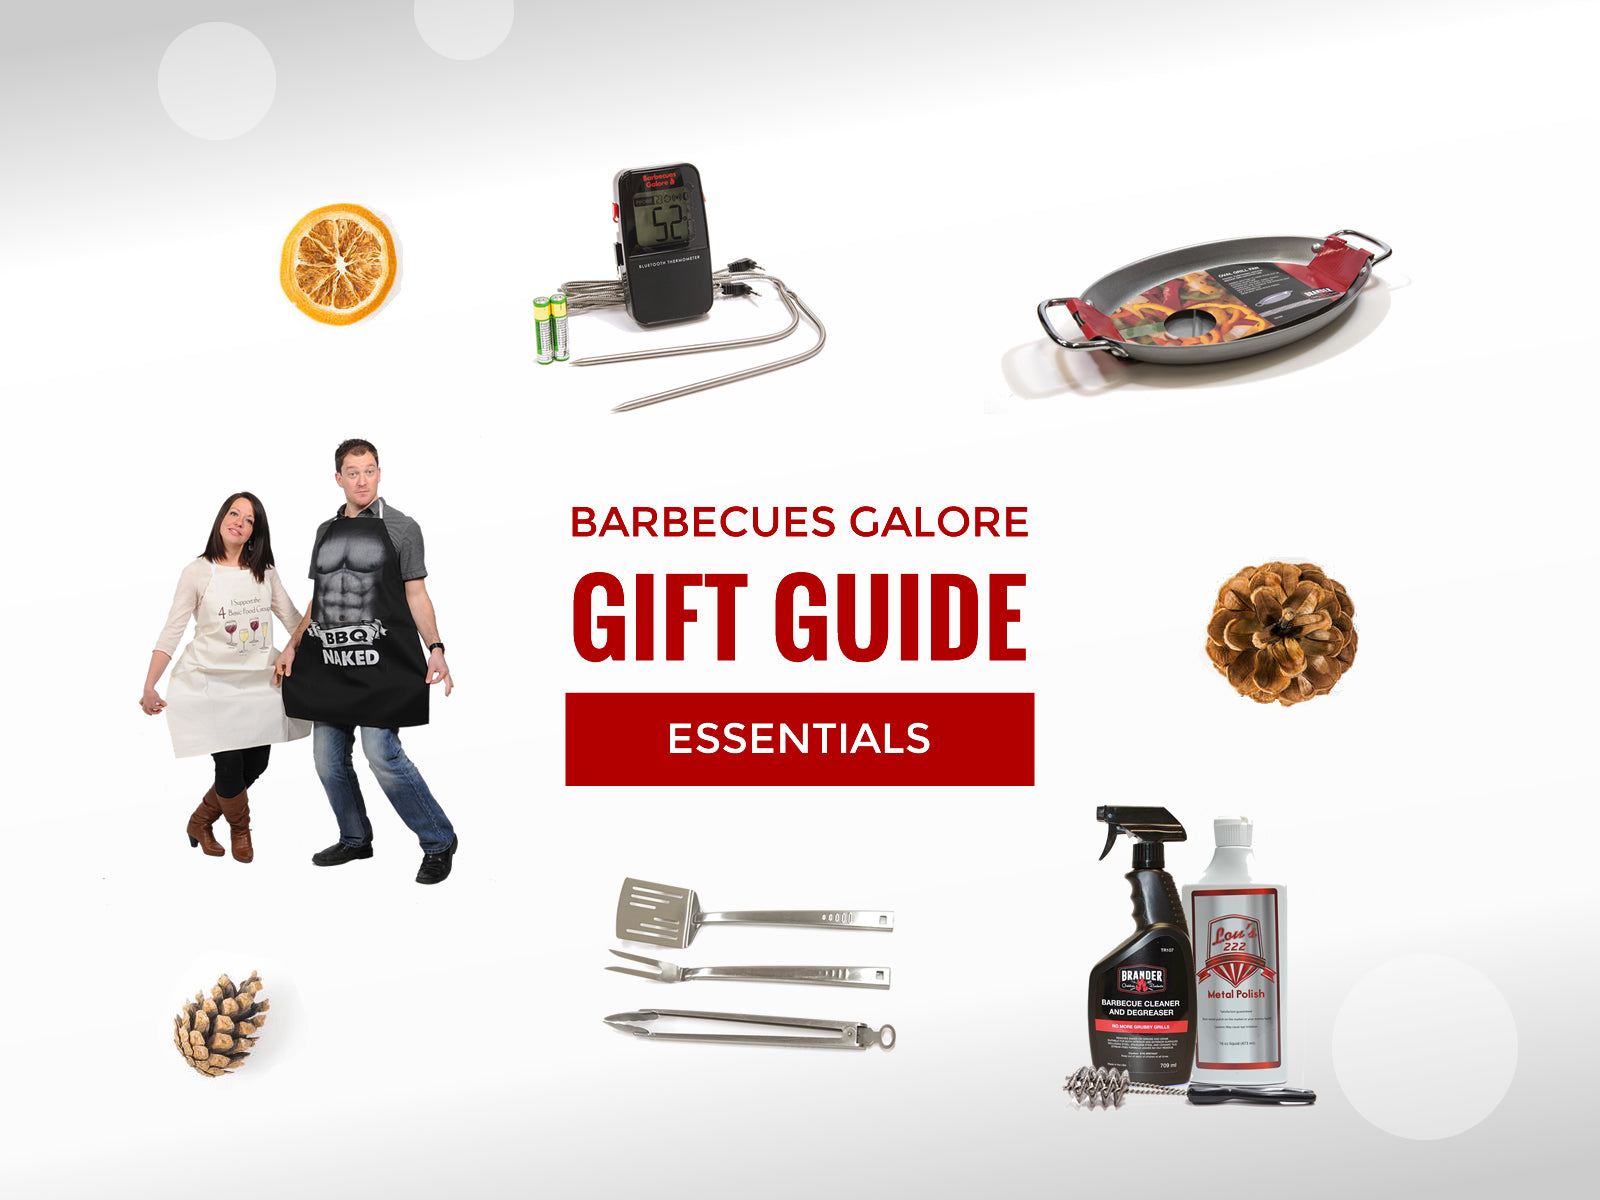 Barbecue Gift Guide | Grilling Essentials - Barbecues Galore